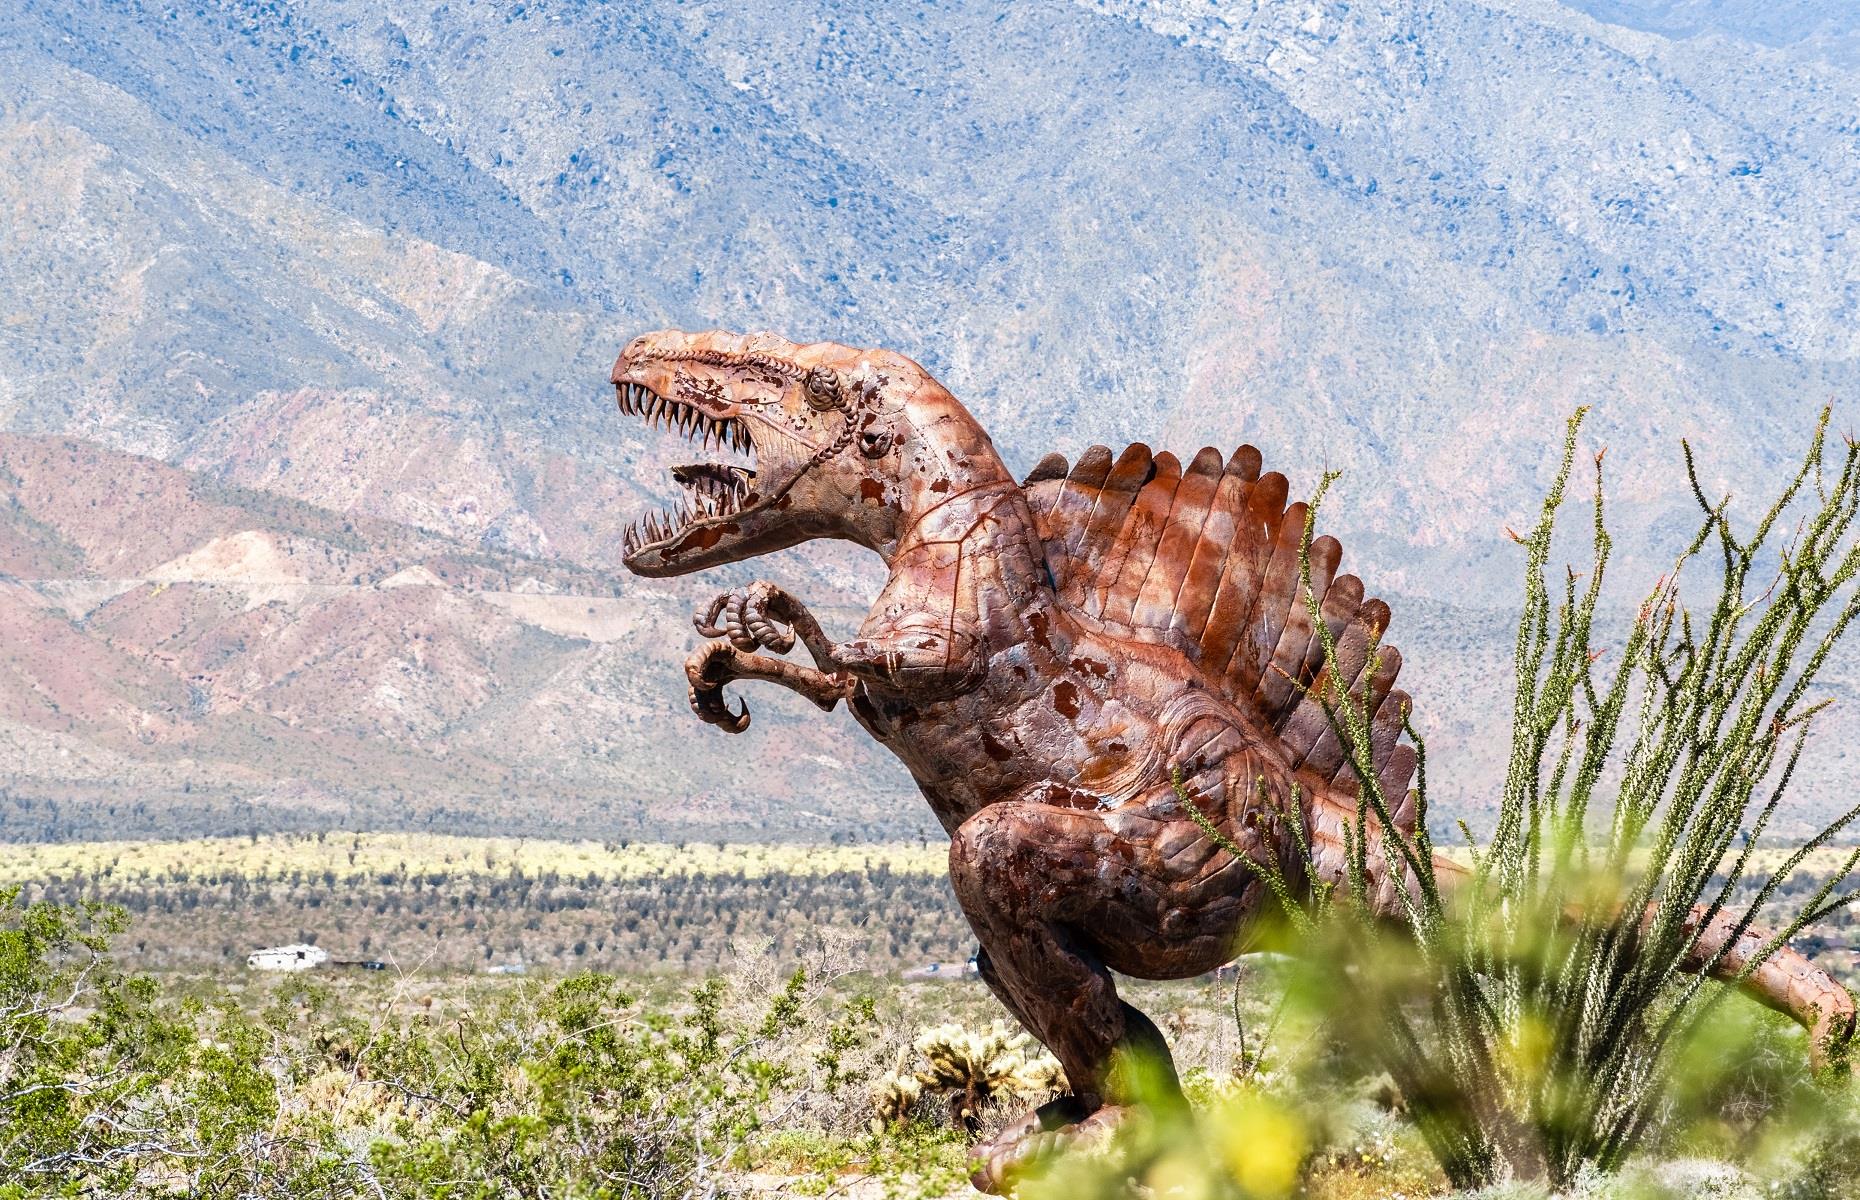 <p>If you're seeking culture as well as dino-related fun, then <a href="https://underthesunfoundation.org/">Galleta Meadows Estate</a> ticks all the right boxes. Spread across 1,500 acres of ancient desert land in Borrego Springs, California, this unique Jurassic park is open 24 hours a day and is home to 130 large scale, meticulously crafted metal sculptures. Created by artist Ricardo Breceda, the sculpture park features saber-toothed tigers, raptors and mammoths, as well as an array of dramatic dinosaurs. </p>